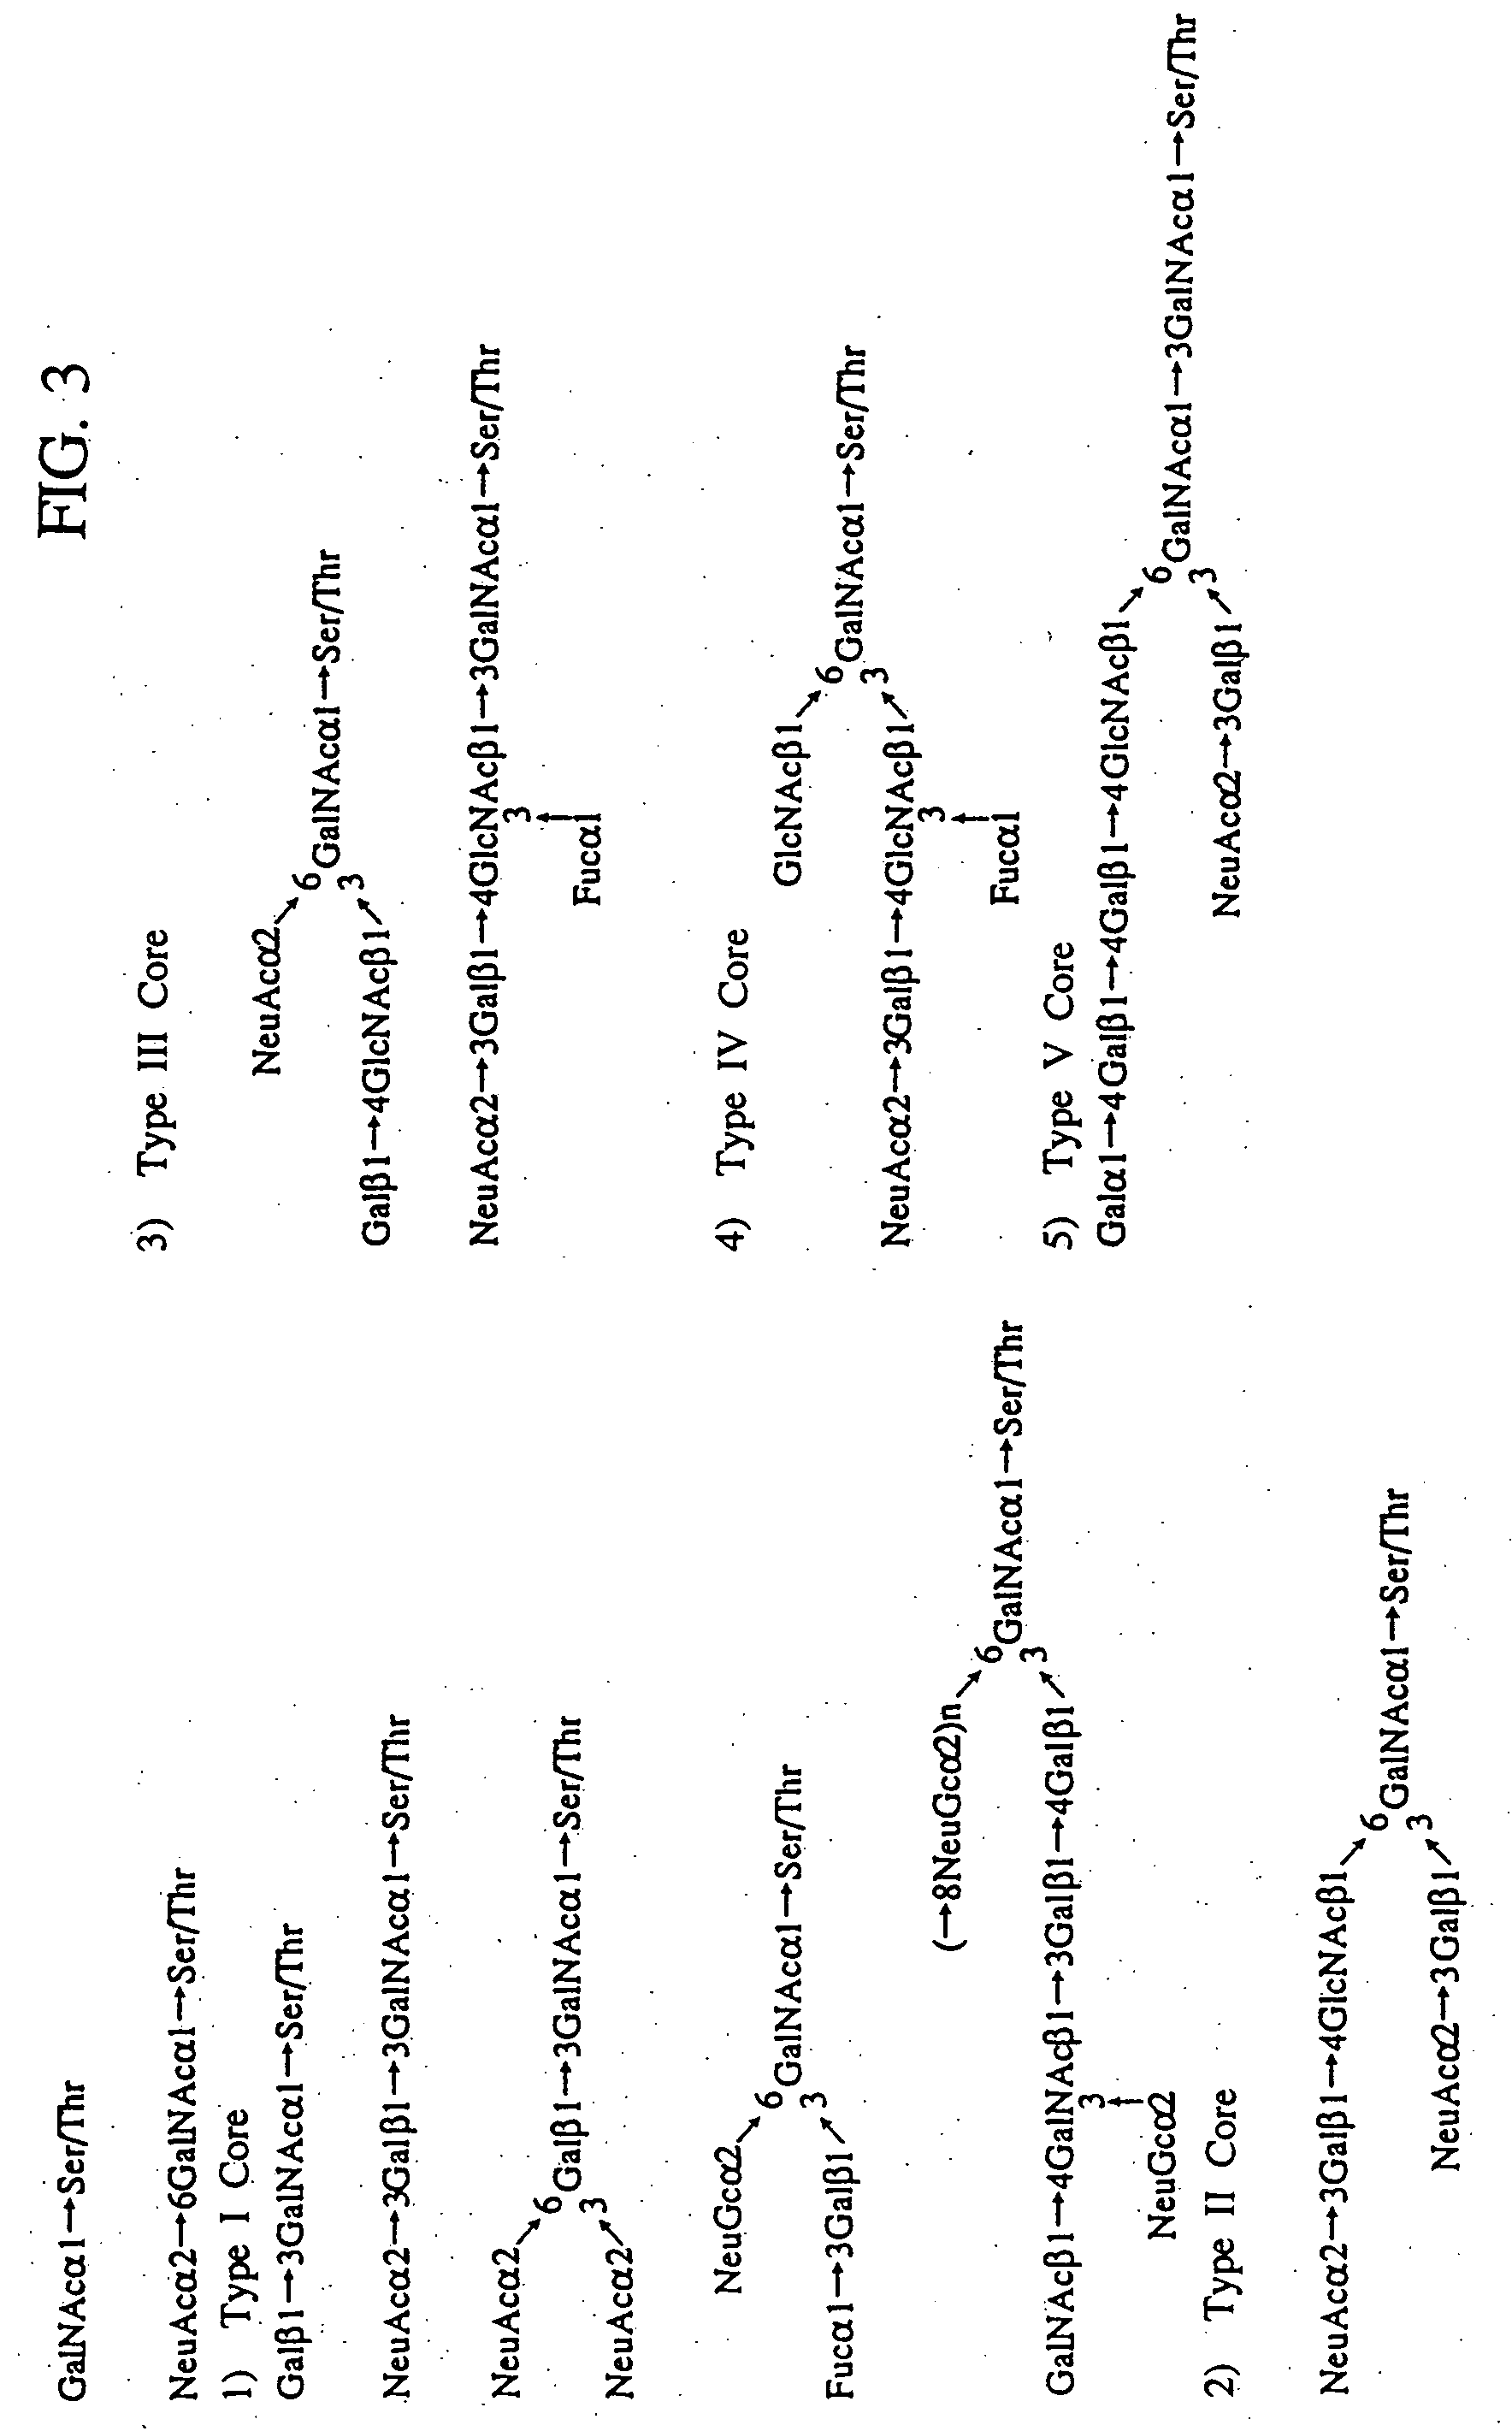 Heparin-binding proteins modified with sugar chains, method of producing the same and pharmaceutical compositions containing same